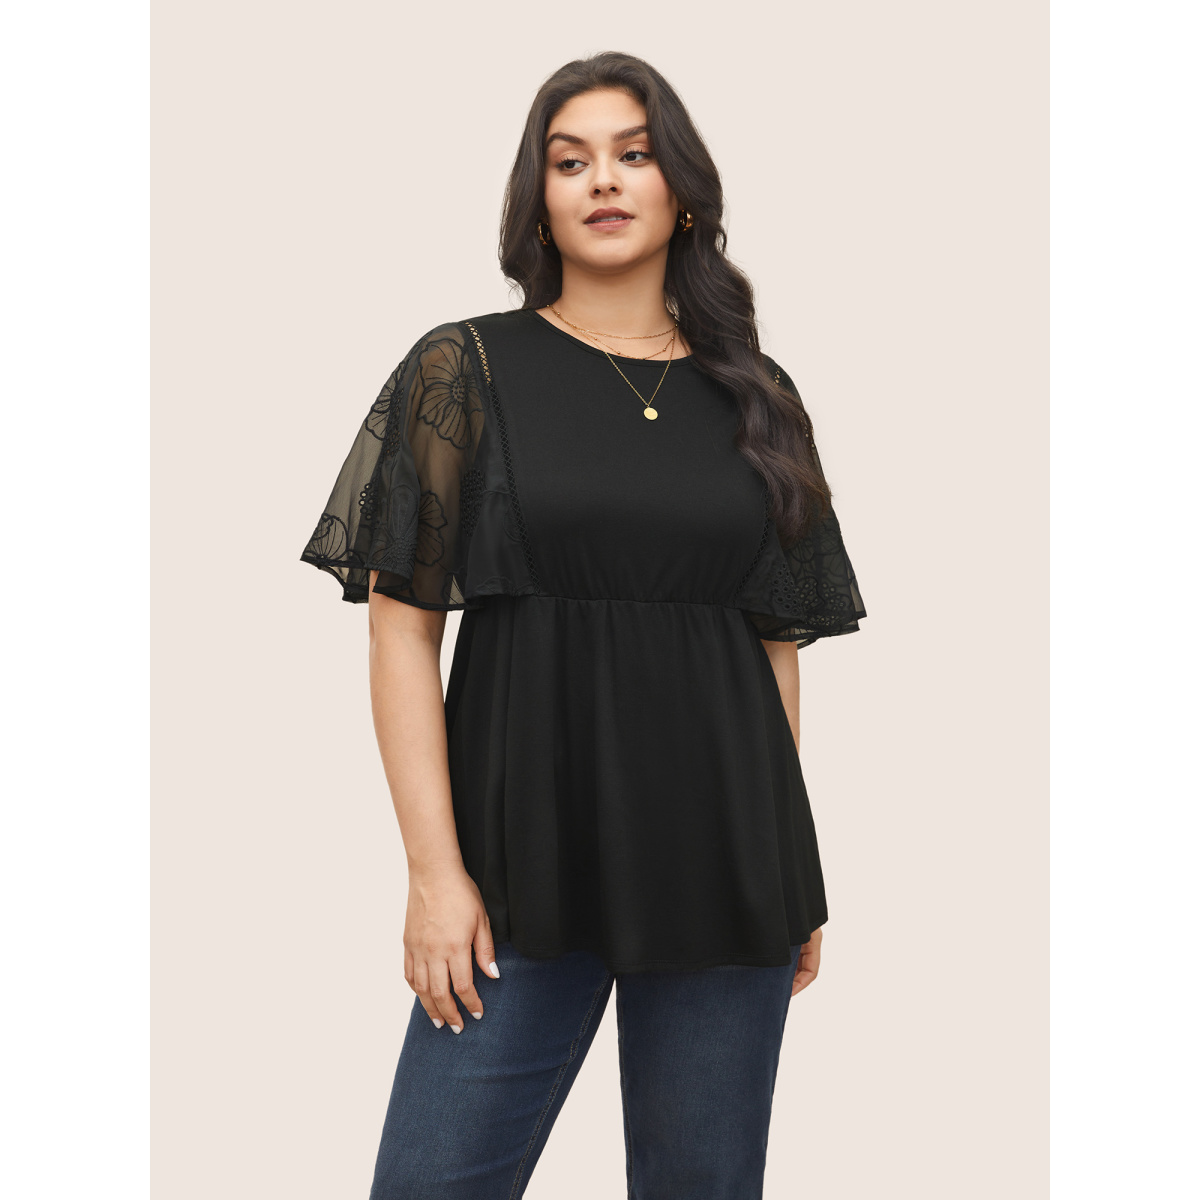 

Plus Size Crochet Lace Mesh Cut Out Ruffle Sleeve Knit Top Black Women Elegant See through Floral Round Neck Everyday T-shirts BloomChic